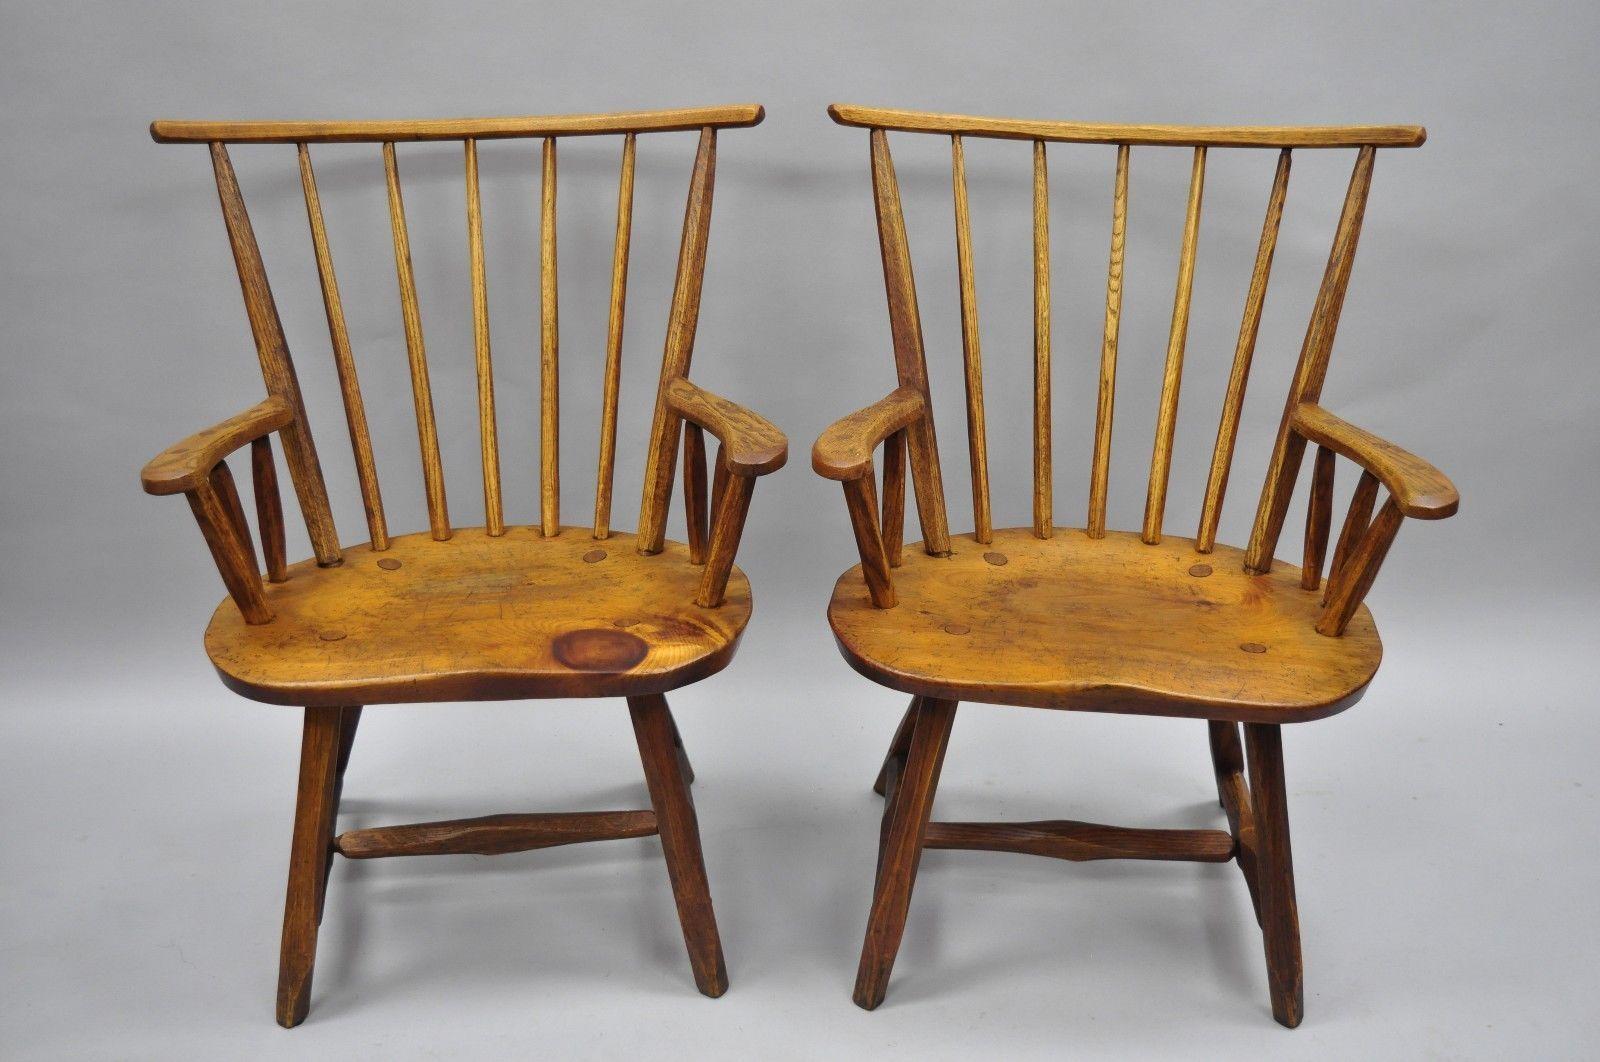 Set of six vintage rustic Primitive pine and oakwood dining chairs by Hunt Country Furniture. Item features pinned and dowel construction, distressed finish, stamped to underside, carved stretcher and legs, solid wood construction, quality American